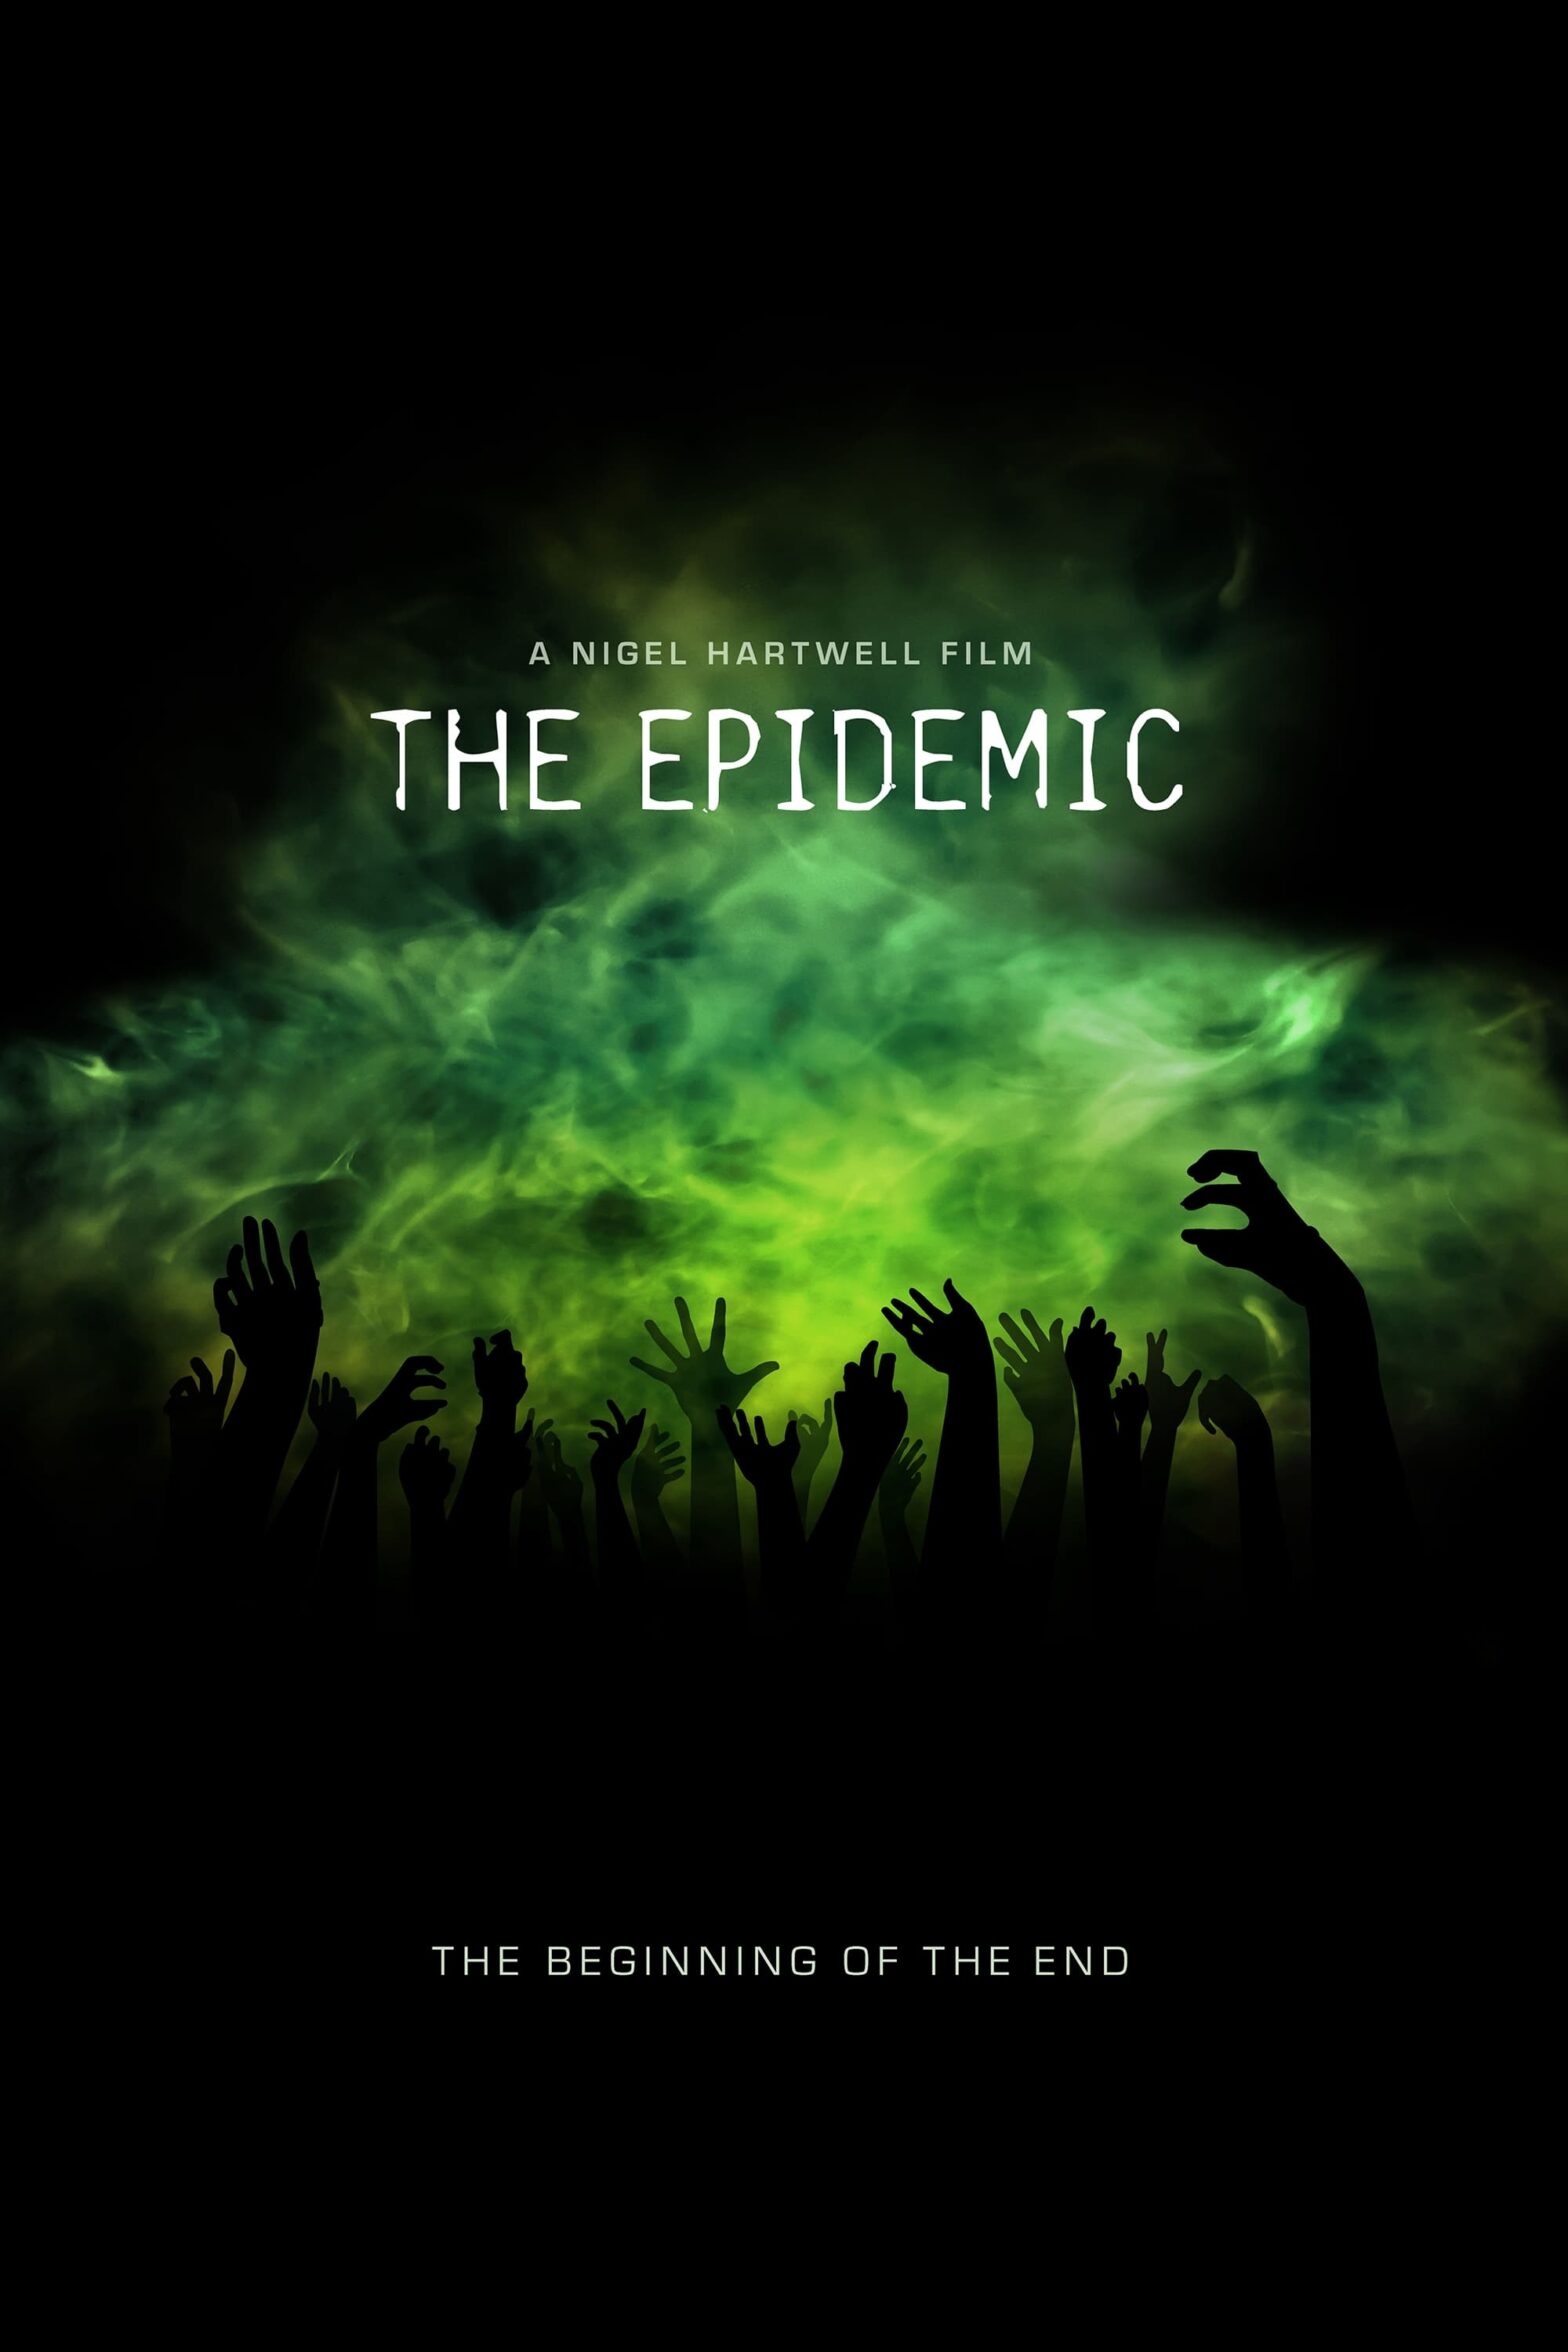 Poster for the movie "The Epidemic"